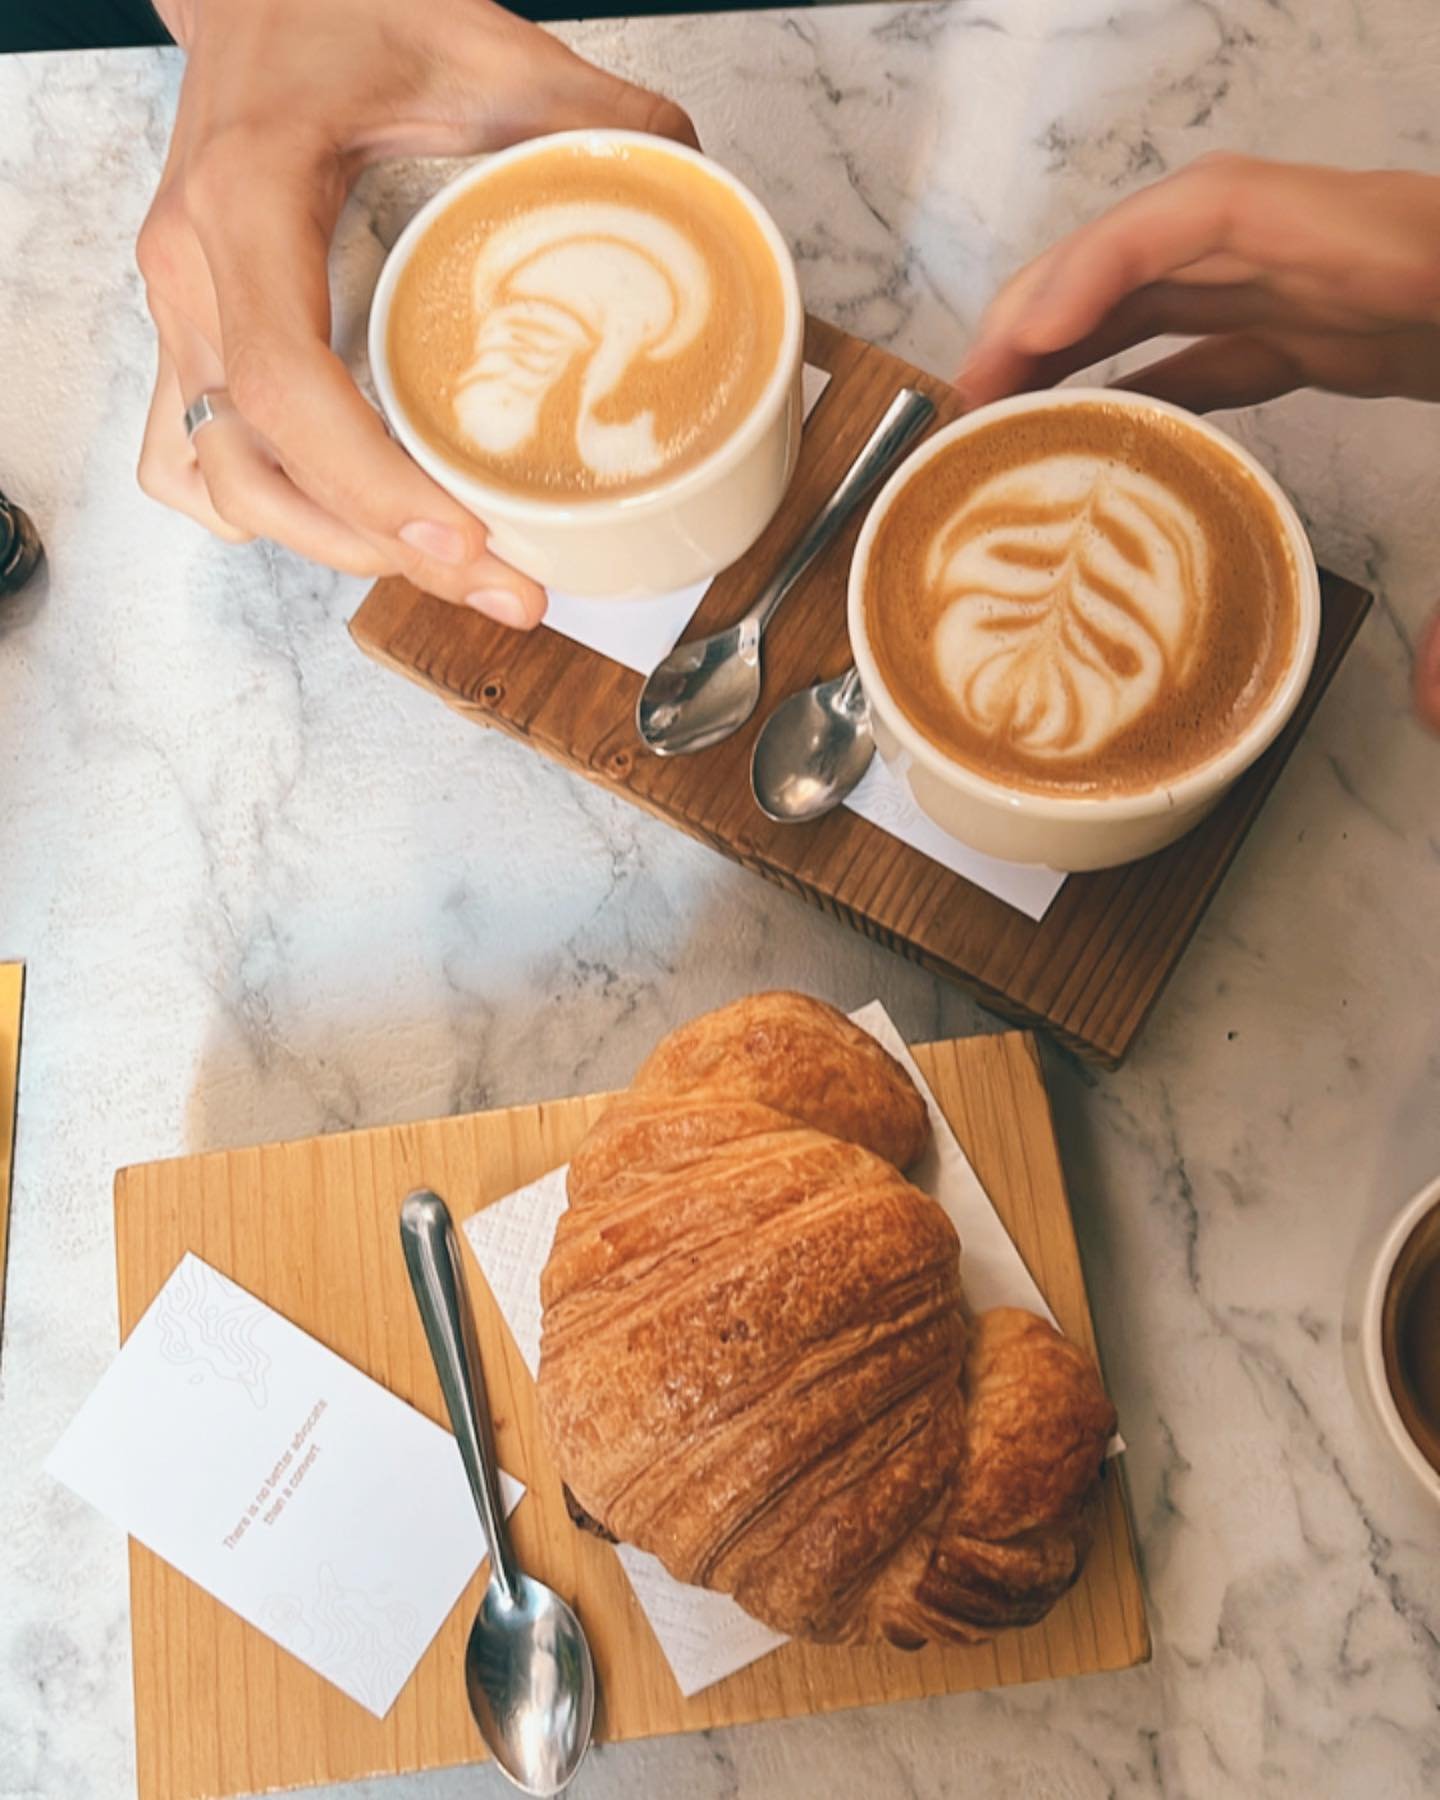 This is how we start Fridays.

Suggestion 1) order a baked good, because&hellip; it&rsquo;s Friday 

Suggestion 2) invite a friend (or bring that friend a coffee) 

Suggestion 3) take a moment to relax. To look around and realise how lucky you are to